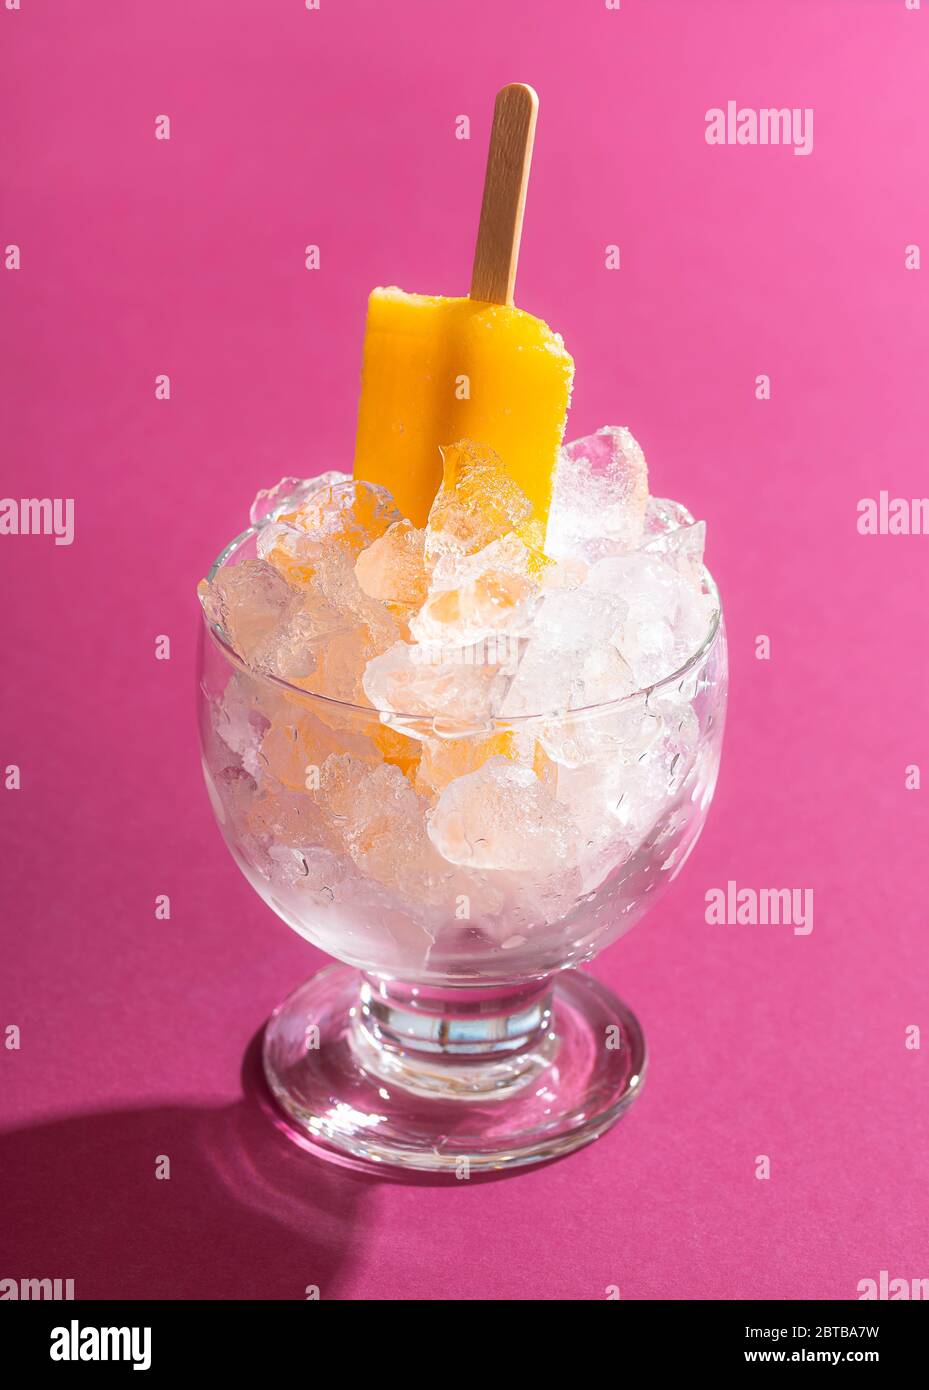 Orange ice cream popsicle in a bowl with crushed ice on a pink seamless background in harsh light. Cooling summer dessert. Vegan ice cream on stick. Stock Photo